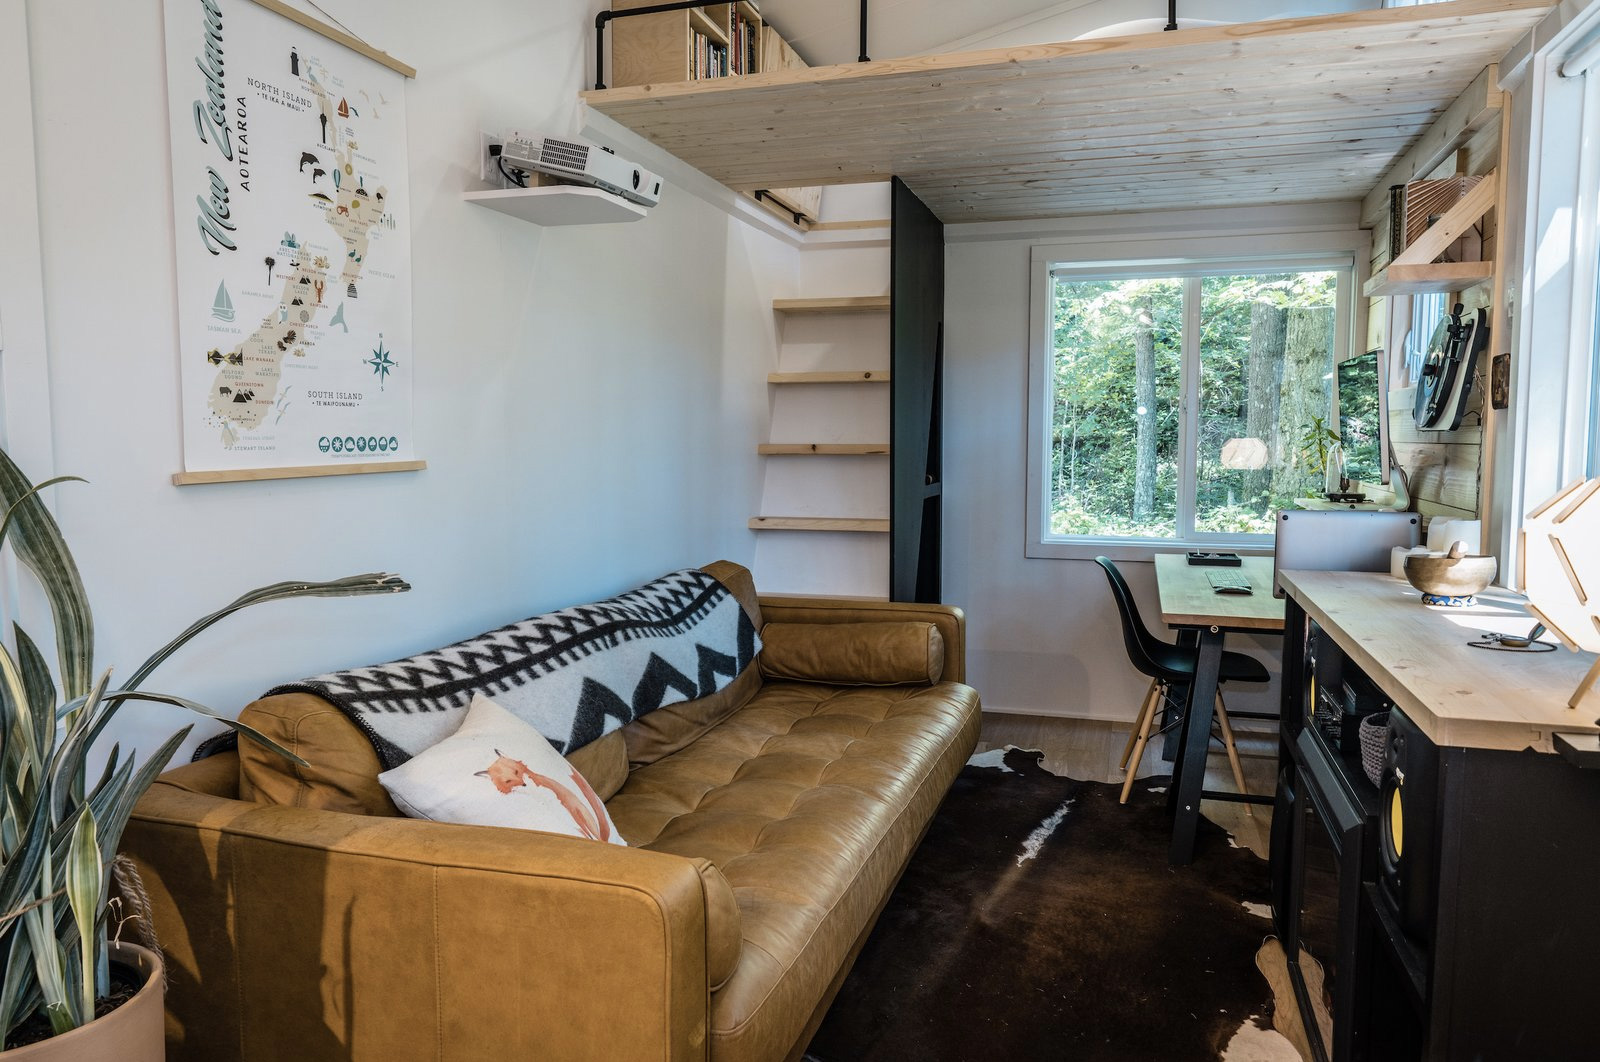 A ‘Scandinese’ tiny home trailer is for sale in Portland